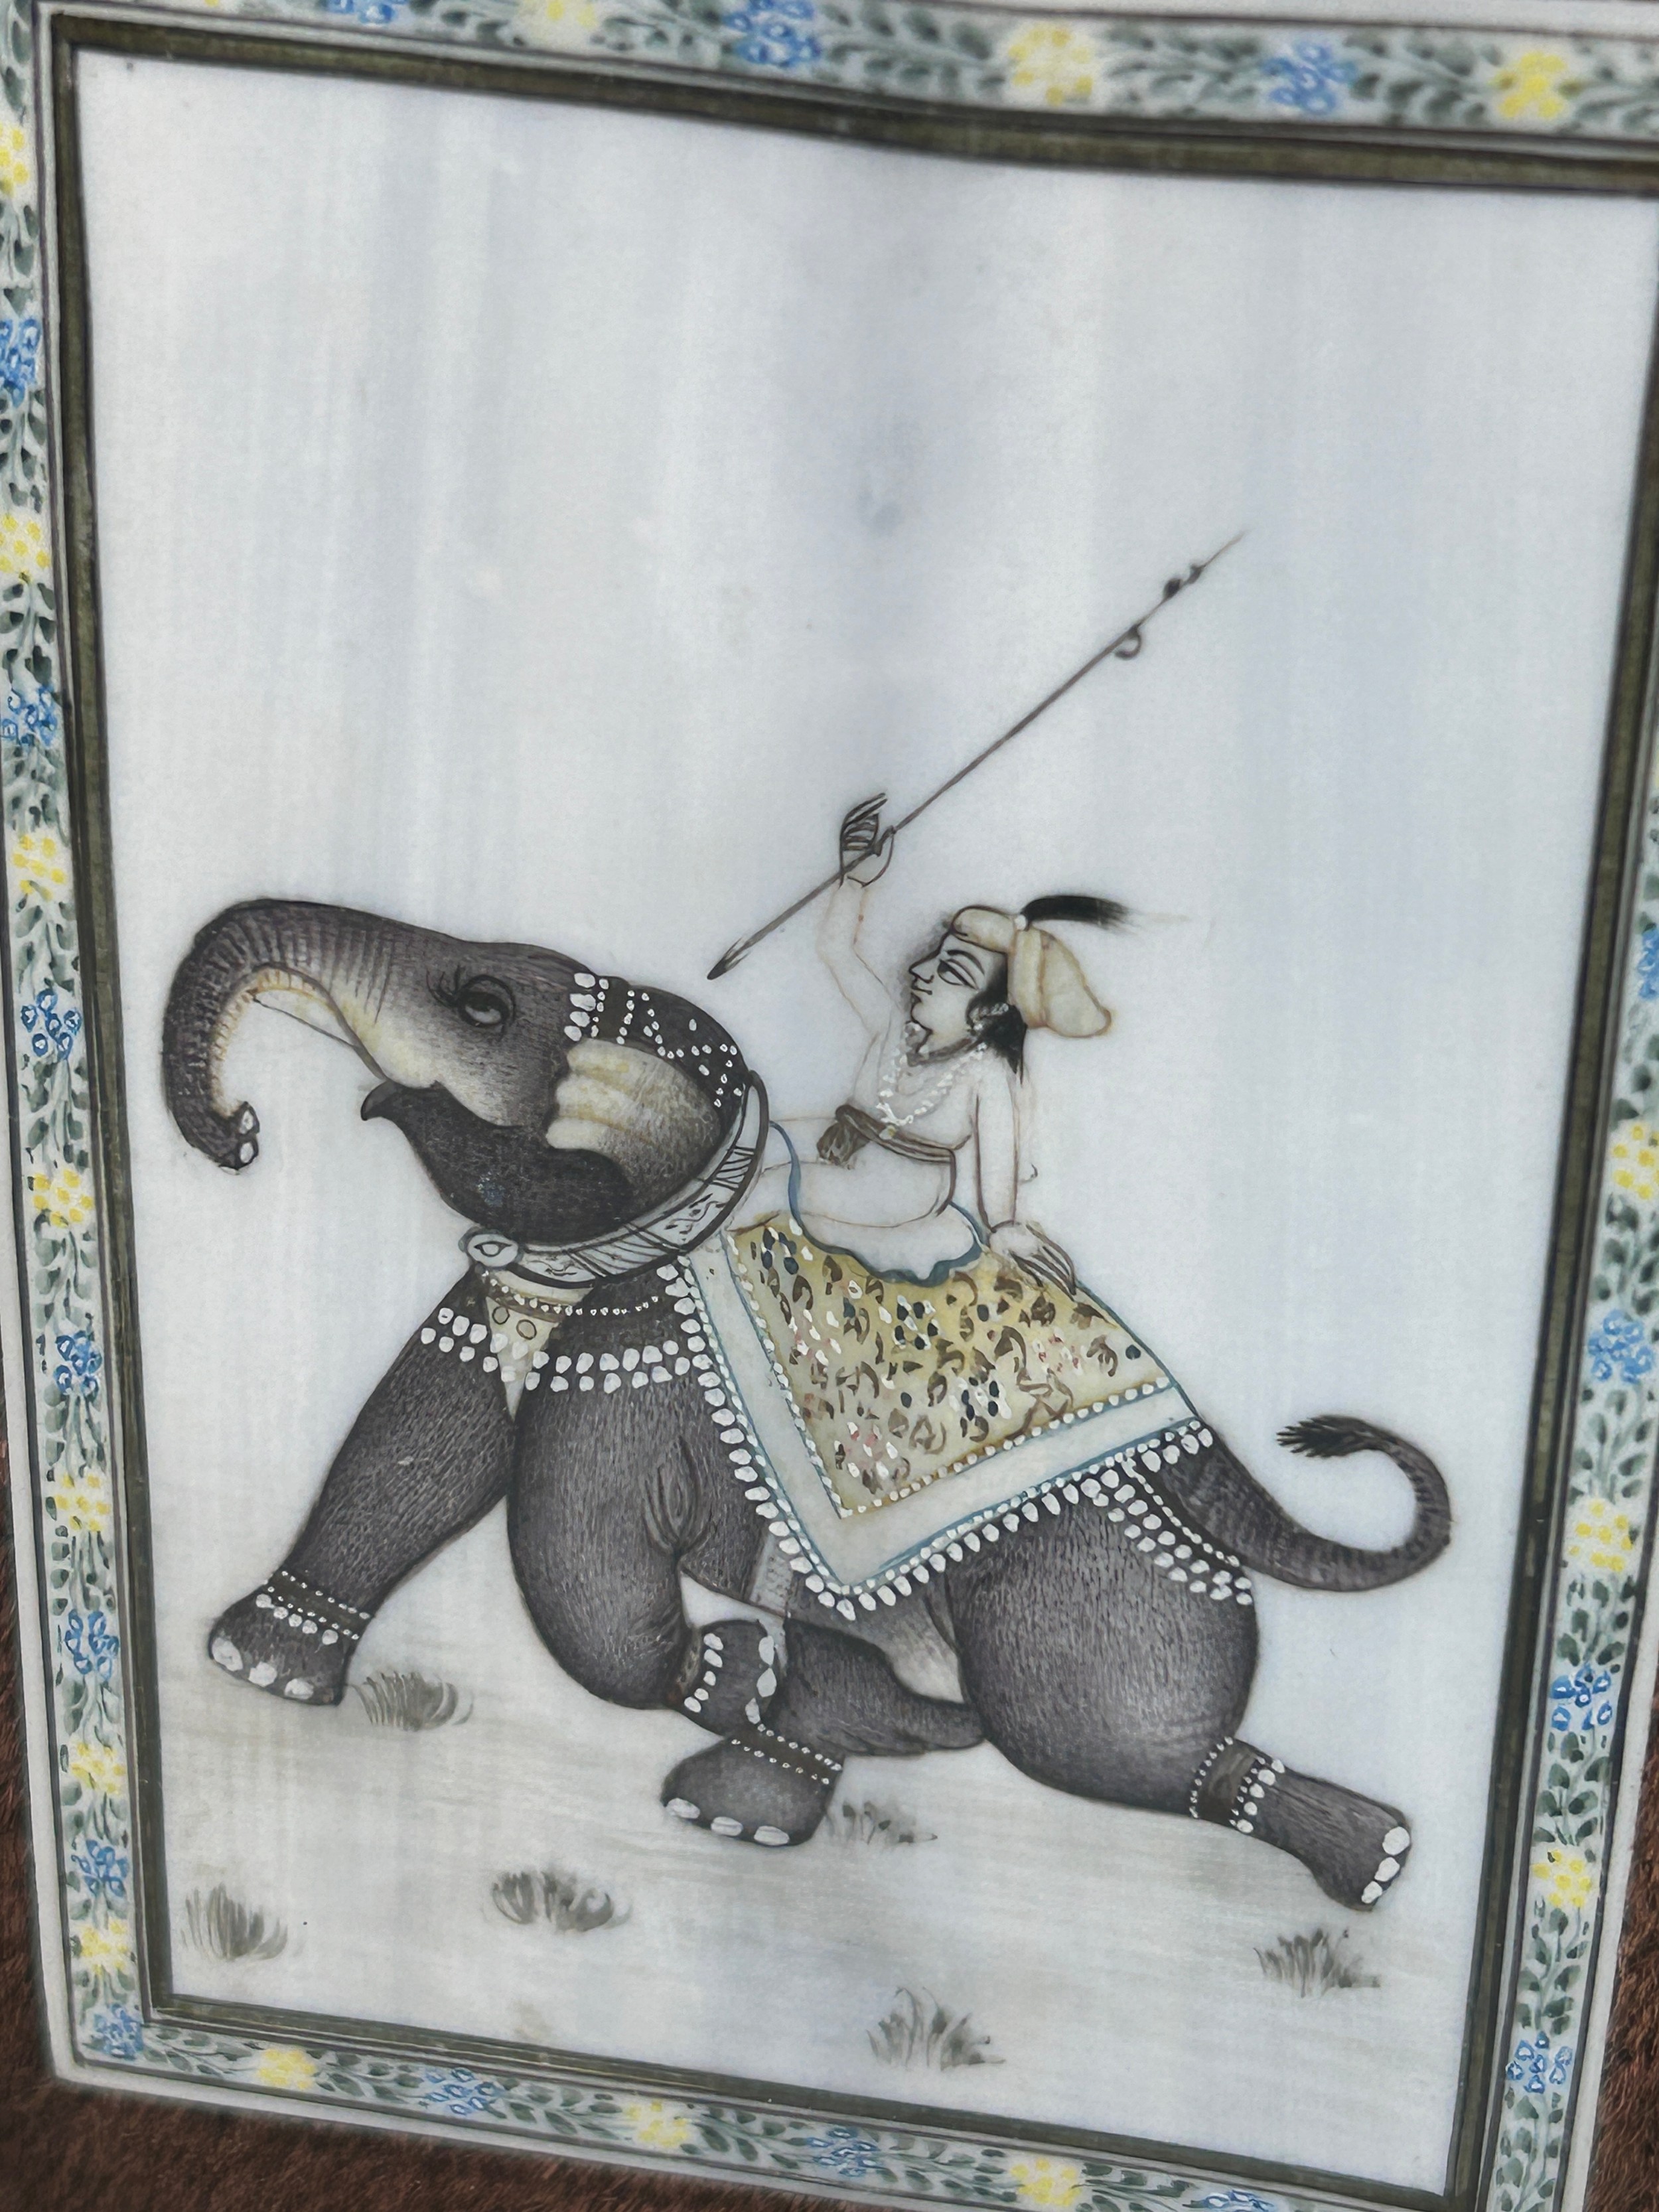 A 20TH CENTURY INDIAN ALBUM PAGE DEPICTING A FIGURE HOLDING A SPEAR AND RIDING AN ELEPHANT, 10cm x - Image 2 of 2